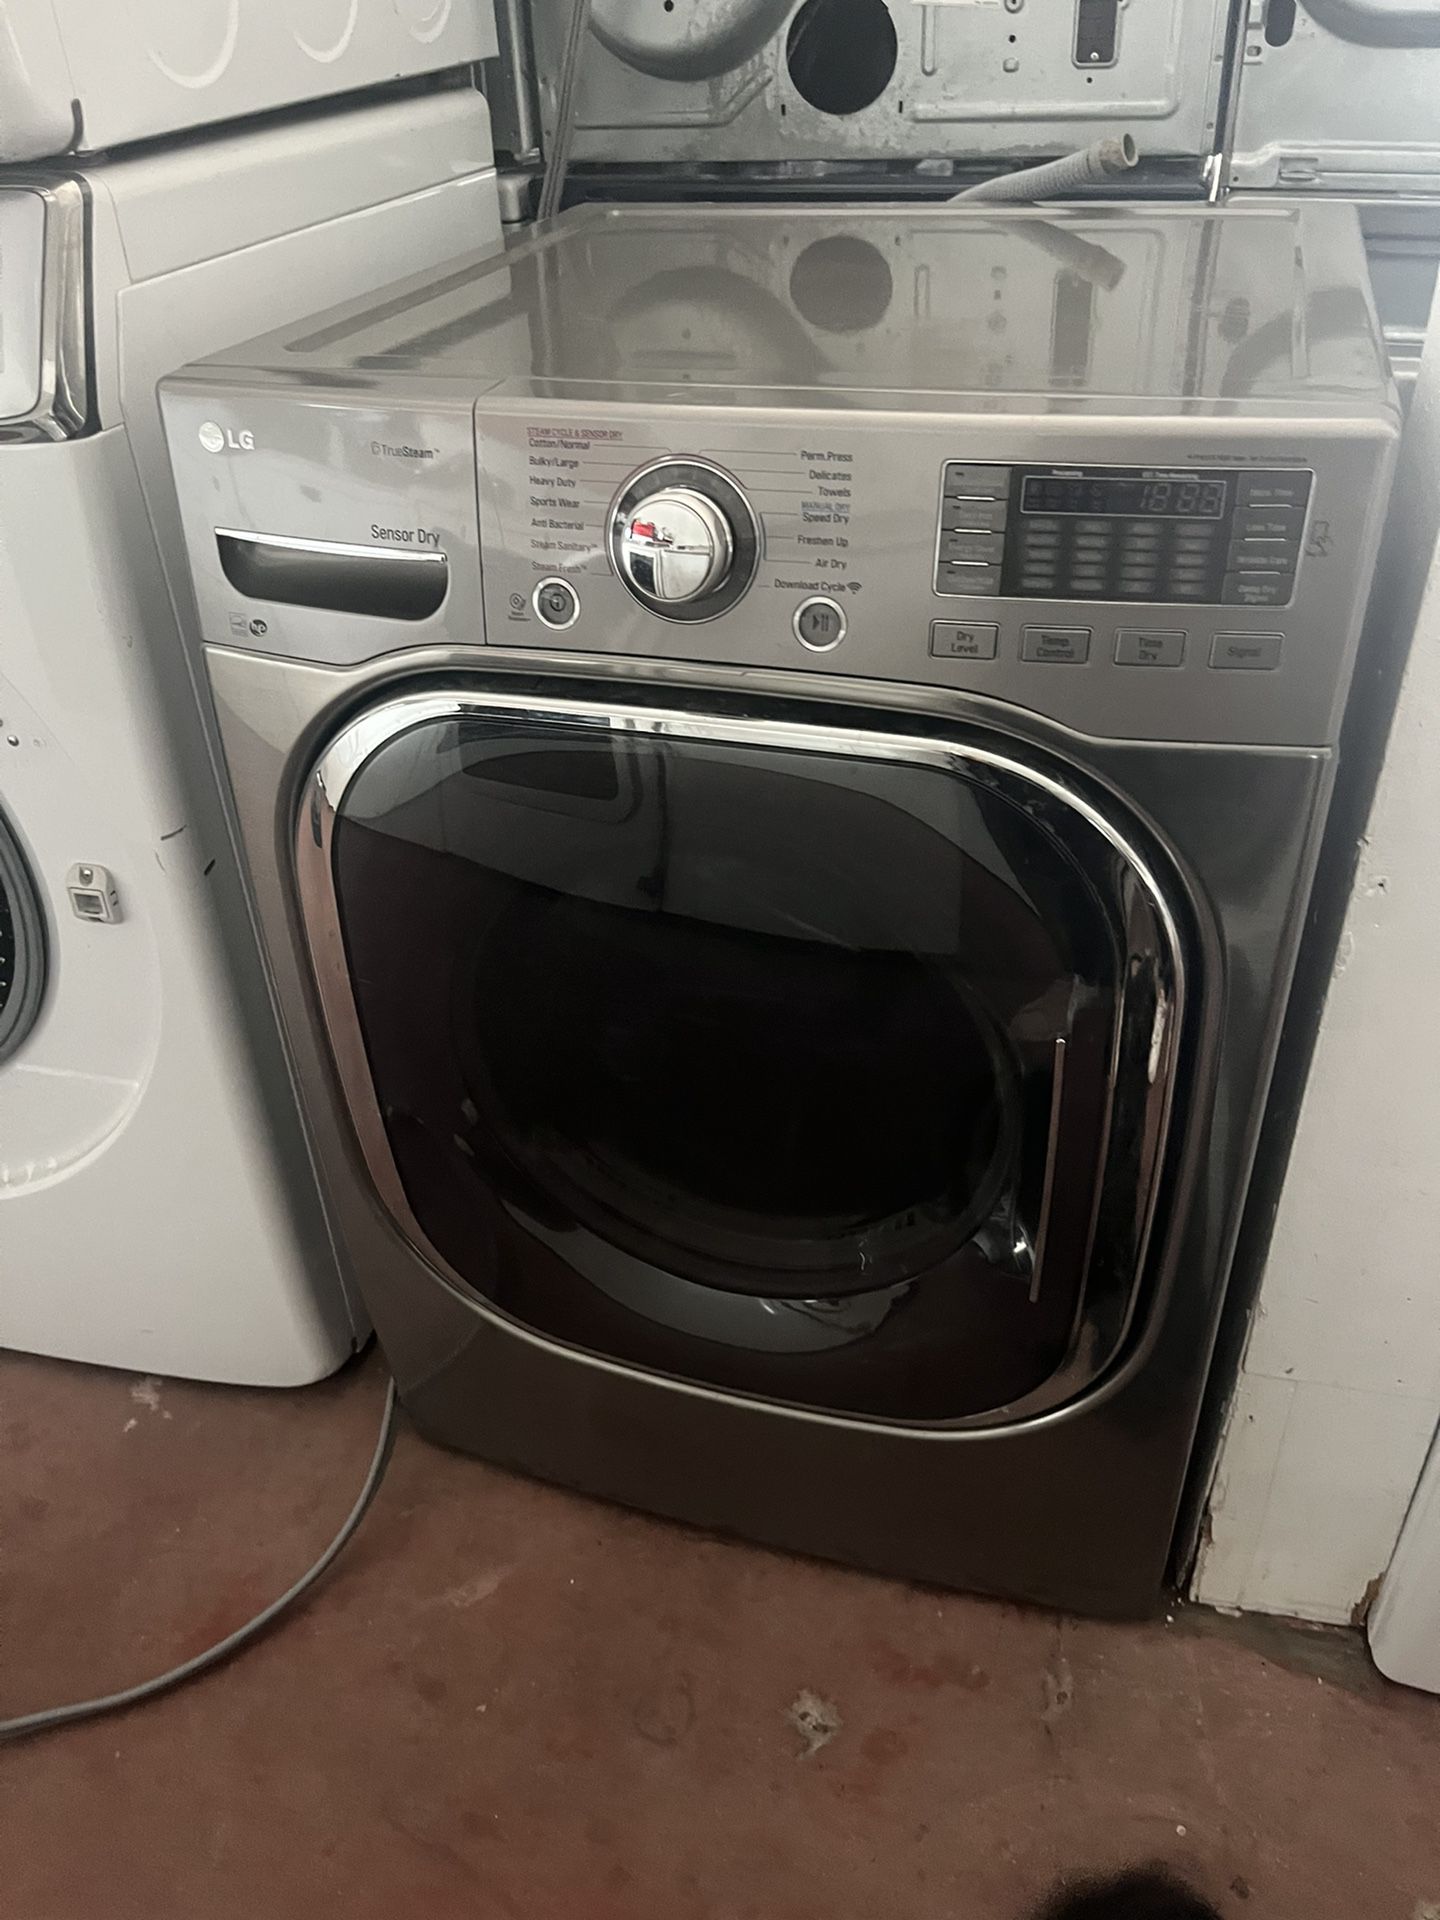 Lg Steam Electric Dryer Used 